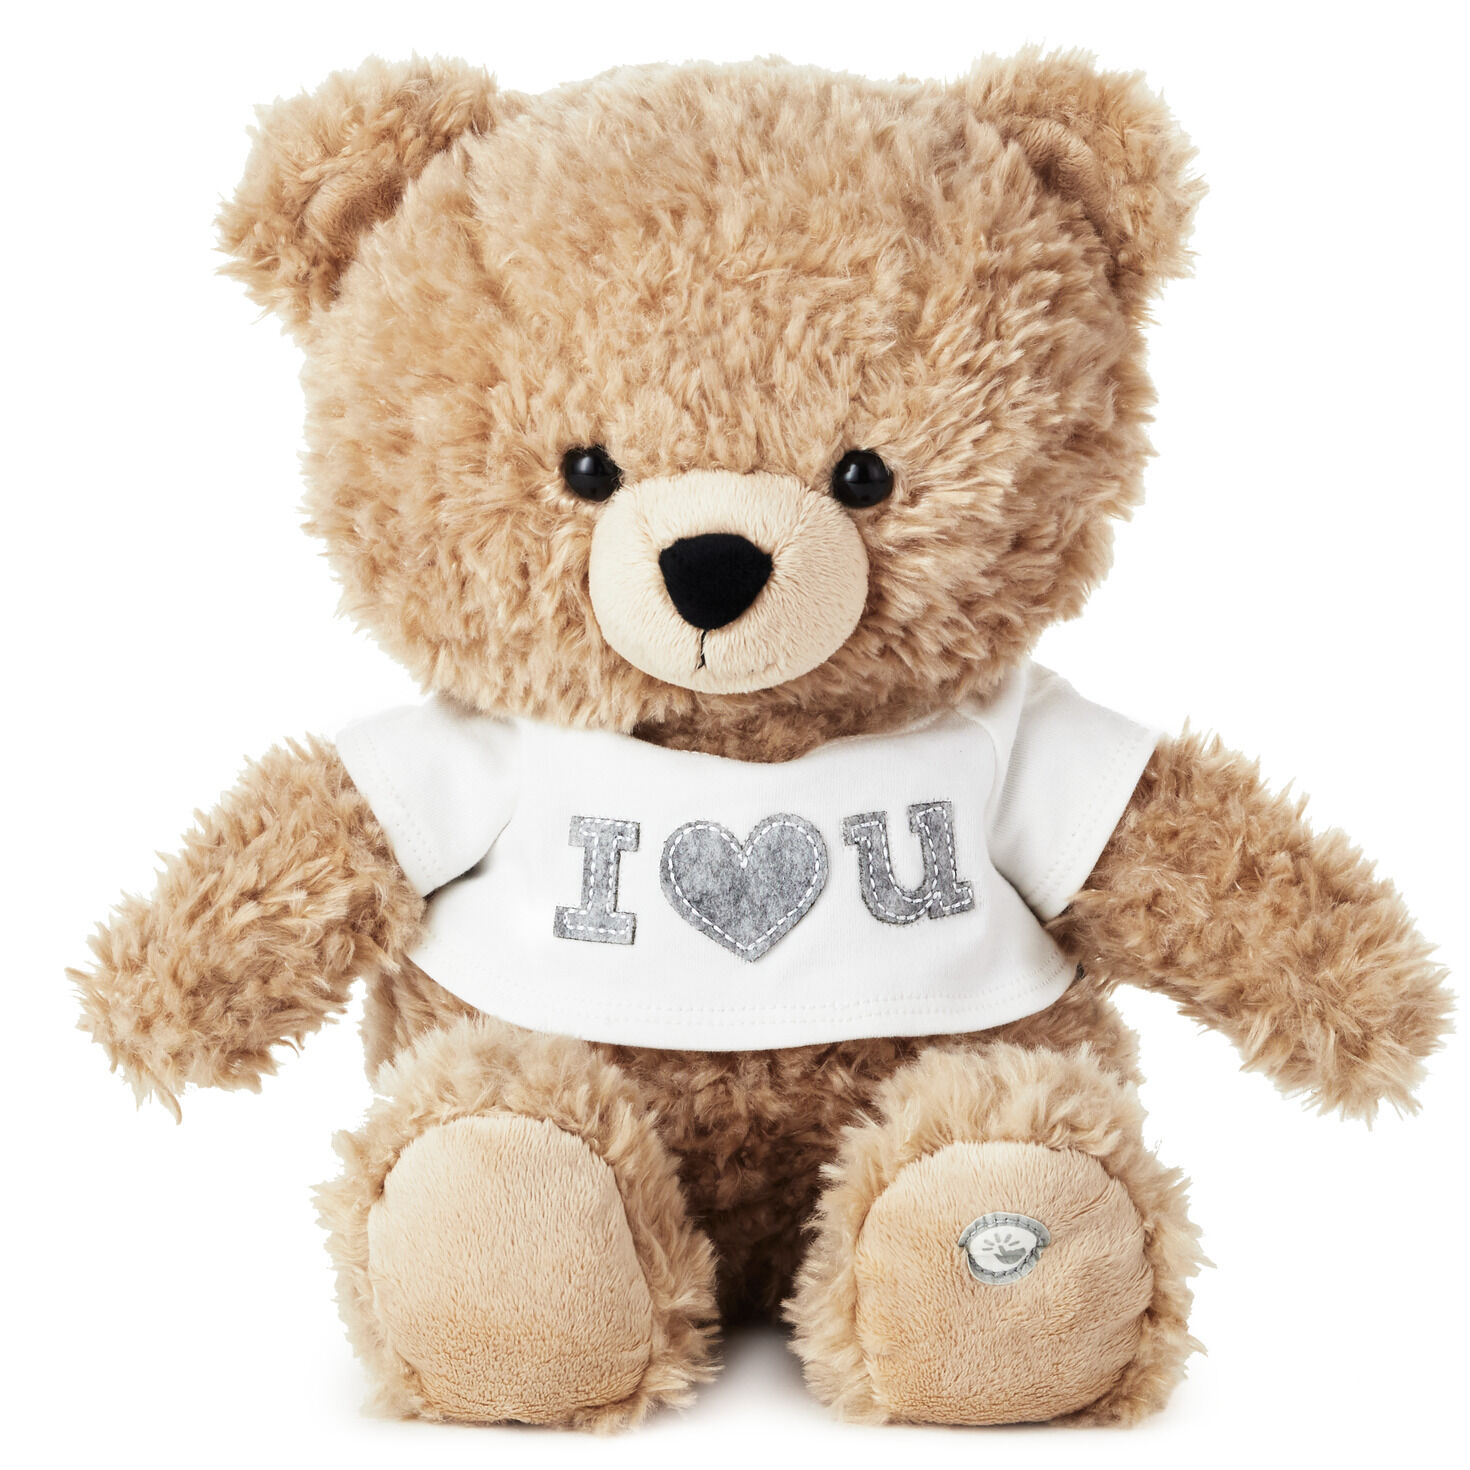 Personalised Teddy Bear Birthday Gifts for Him for Her Love You Any occasion 